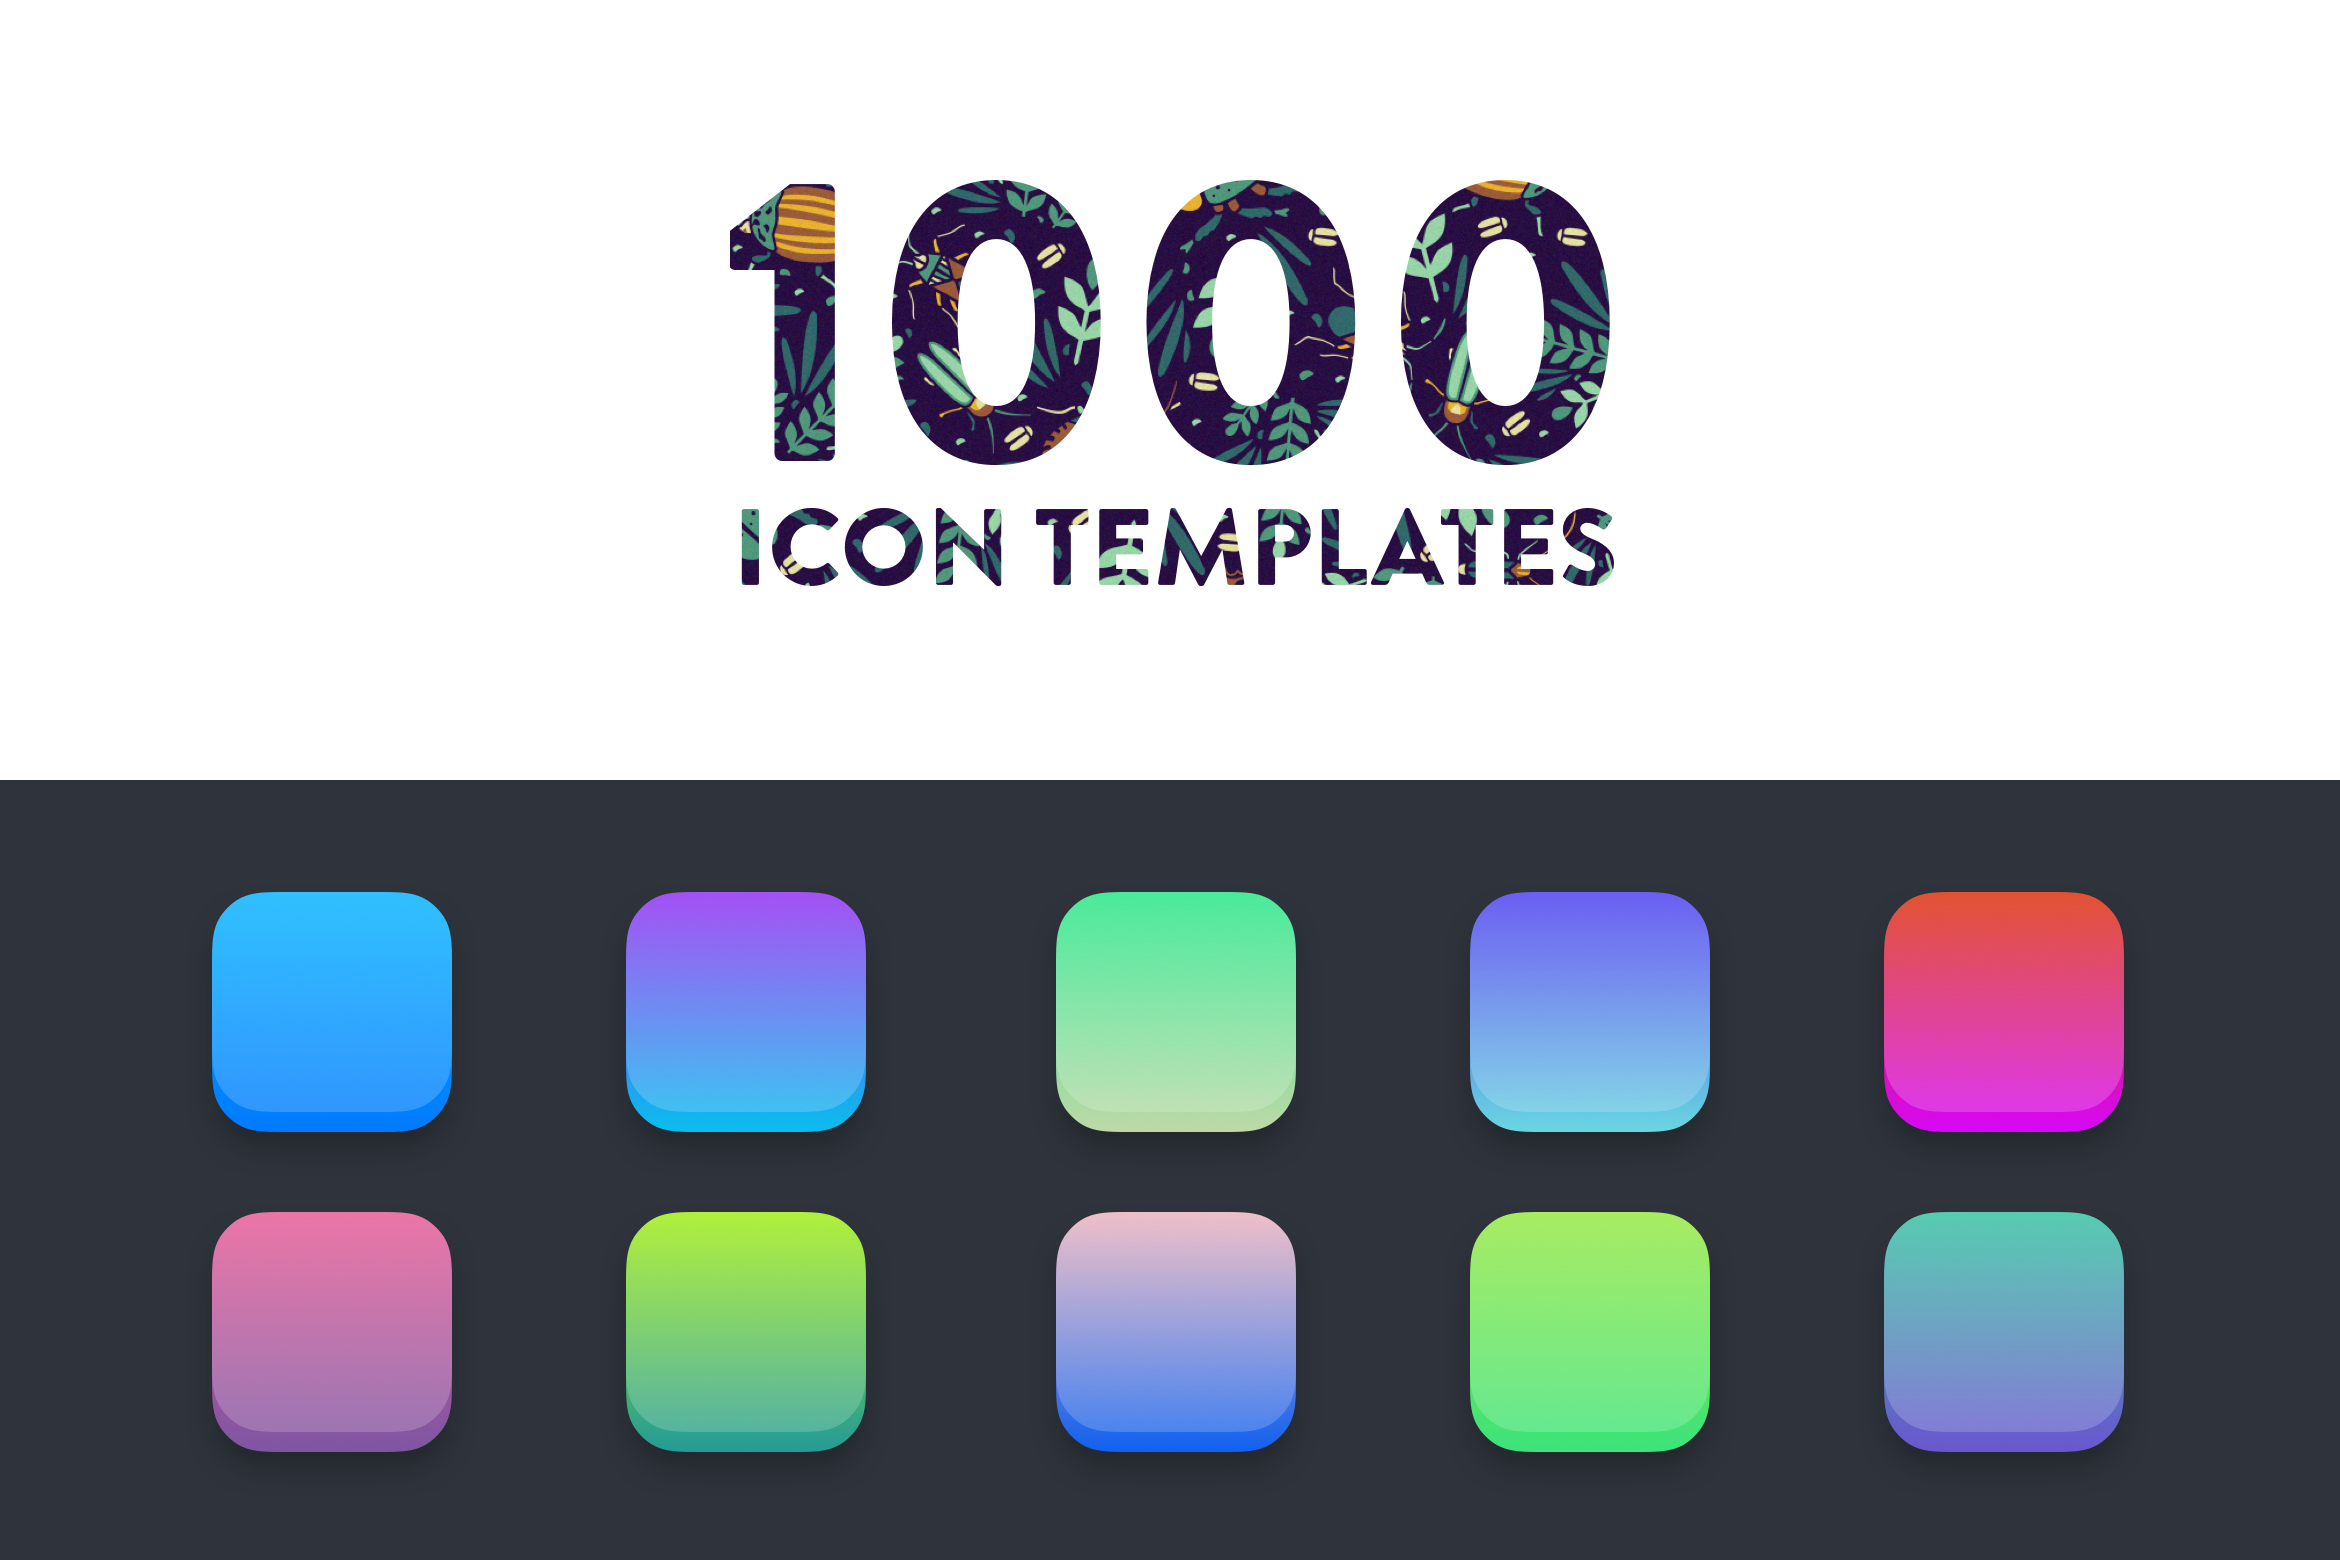 free ios icon pack